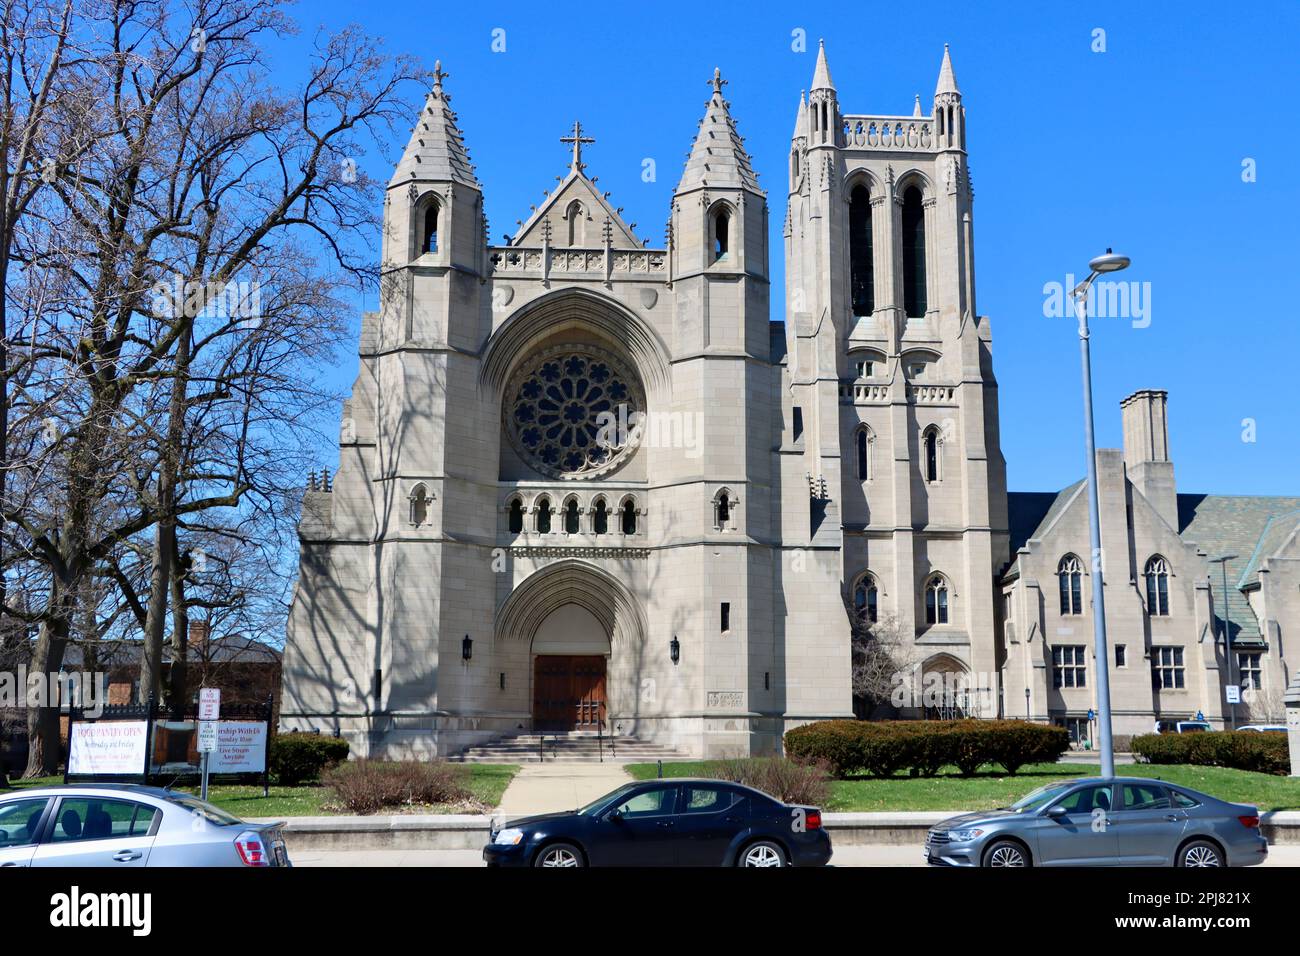 Church of the Covenant on Euclid avenue at University Circle in Cleveland, Ohio Stock Photo